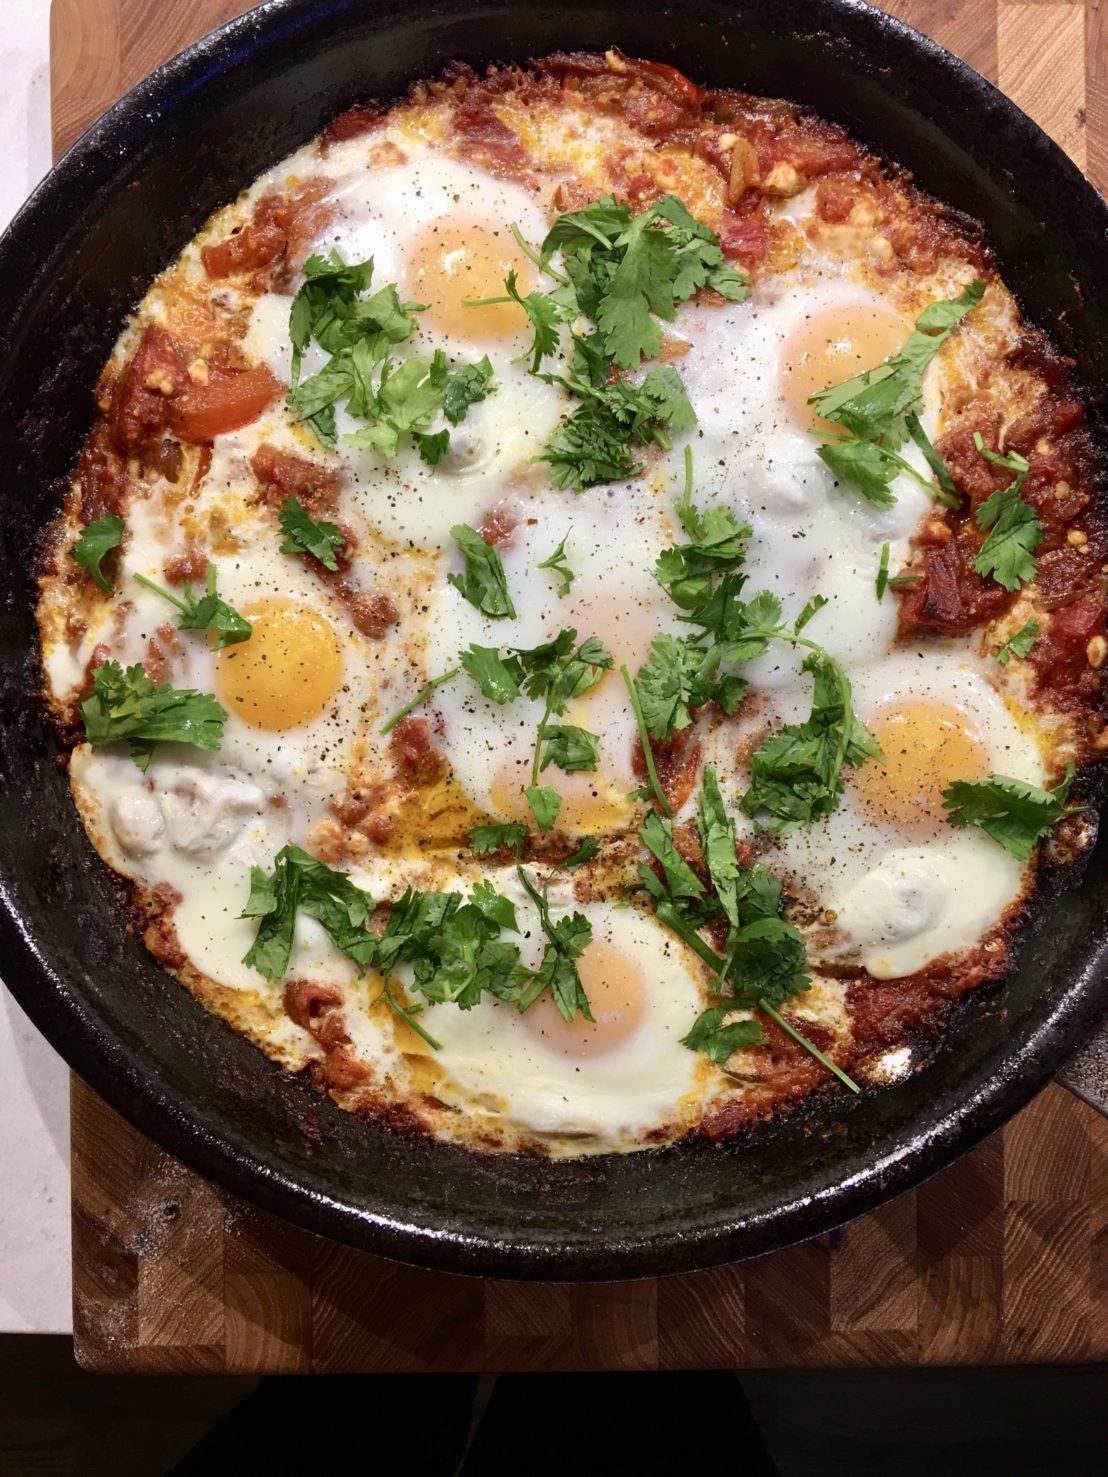 A cast-iron skillet with 6 eggs in tomato sauce and sprinkled with parsley.